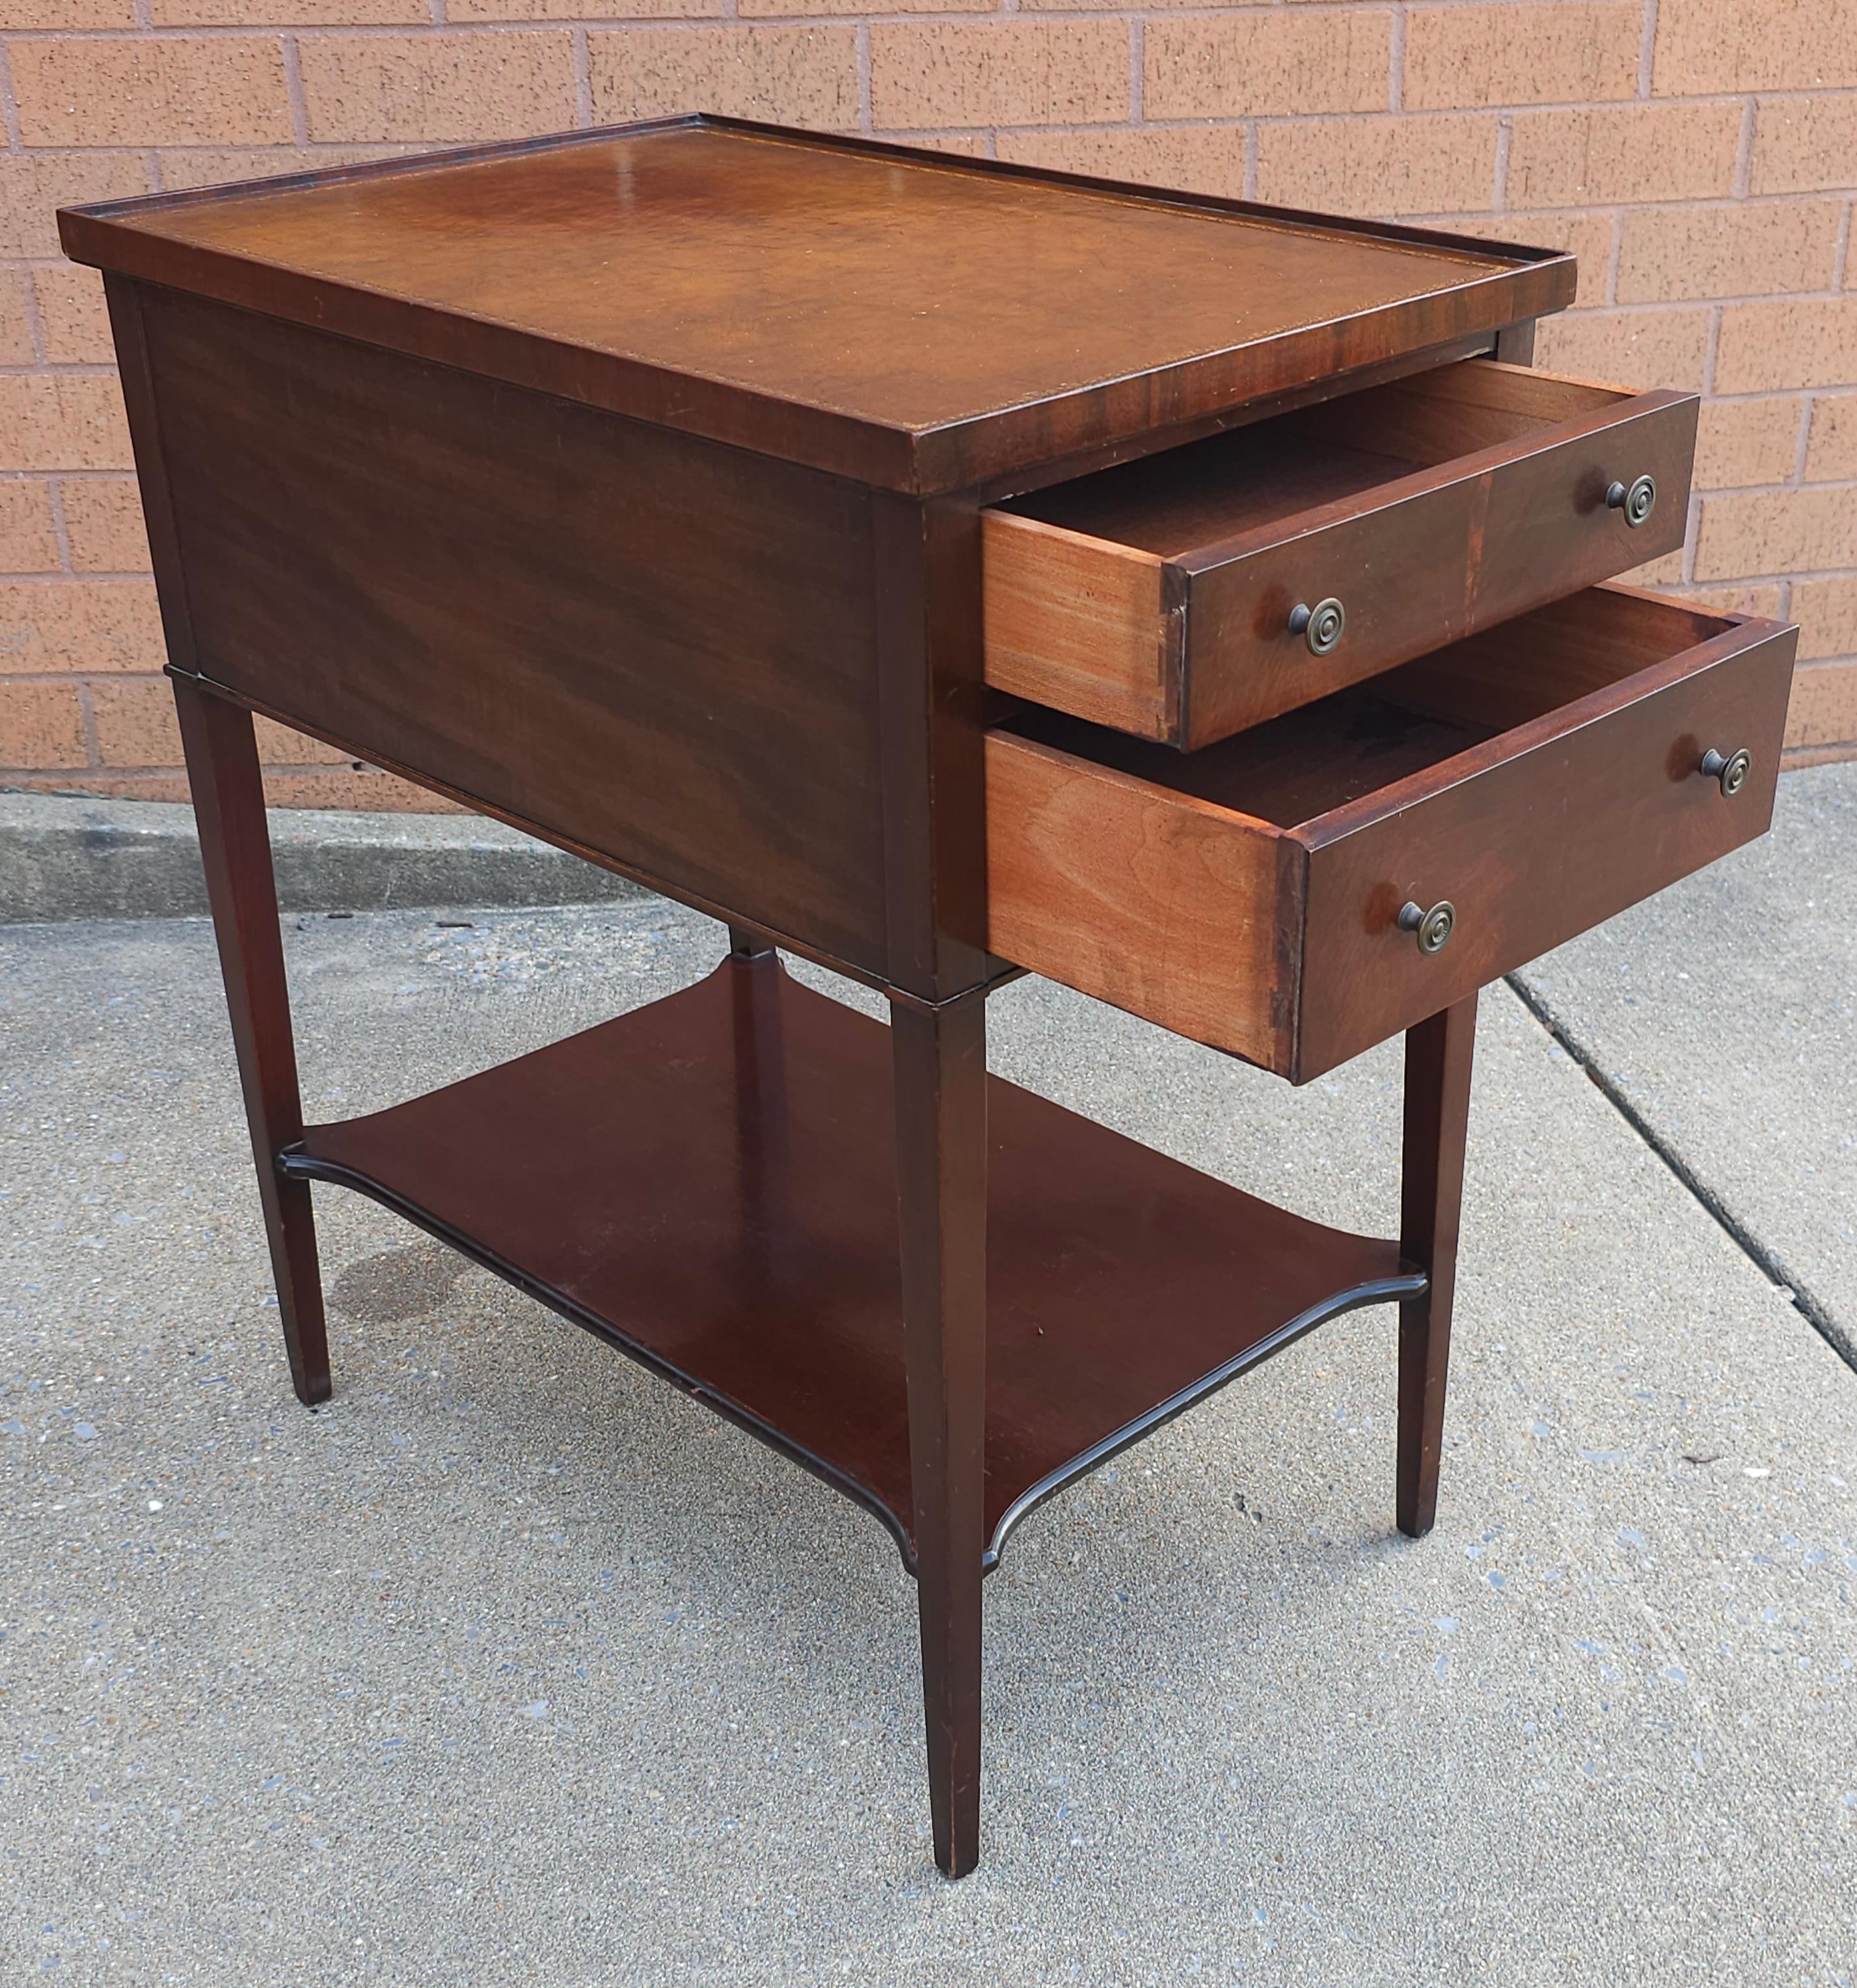 An Imperial Grand Rapids Furniture two drawer and Tooled Leather with gold stenciling Mahogany two Tiered Side Table
Measures 15